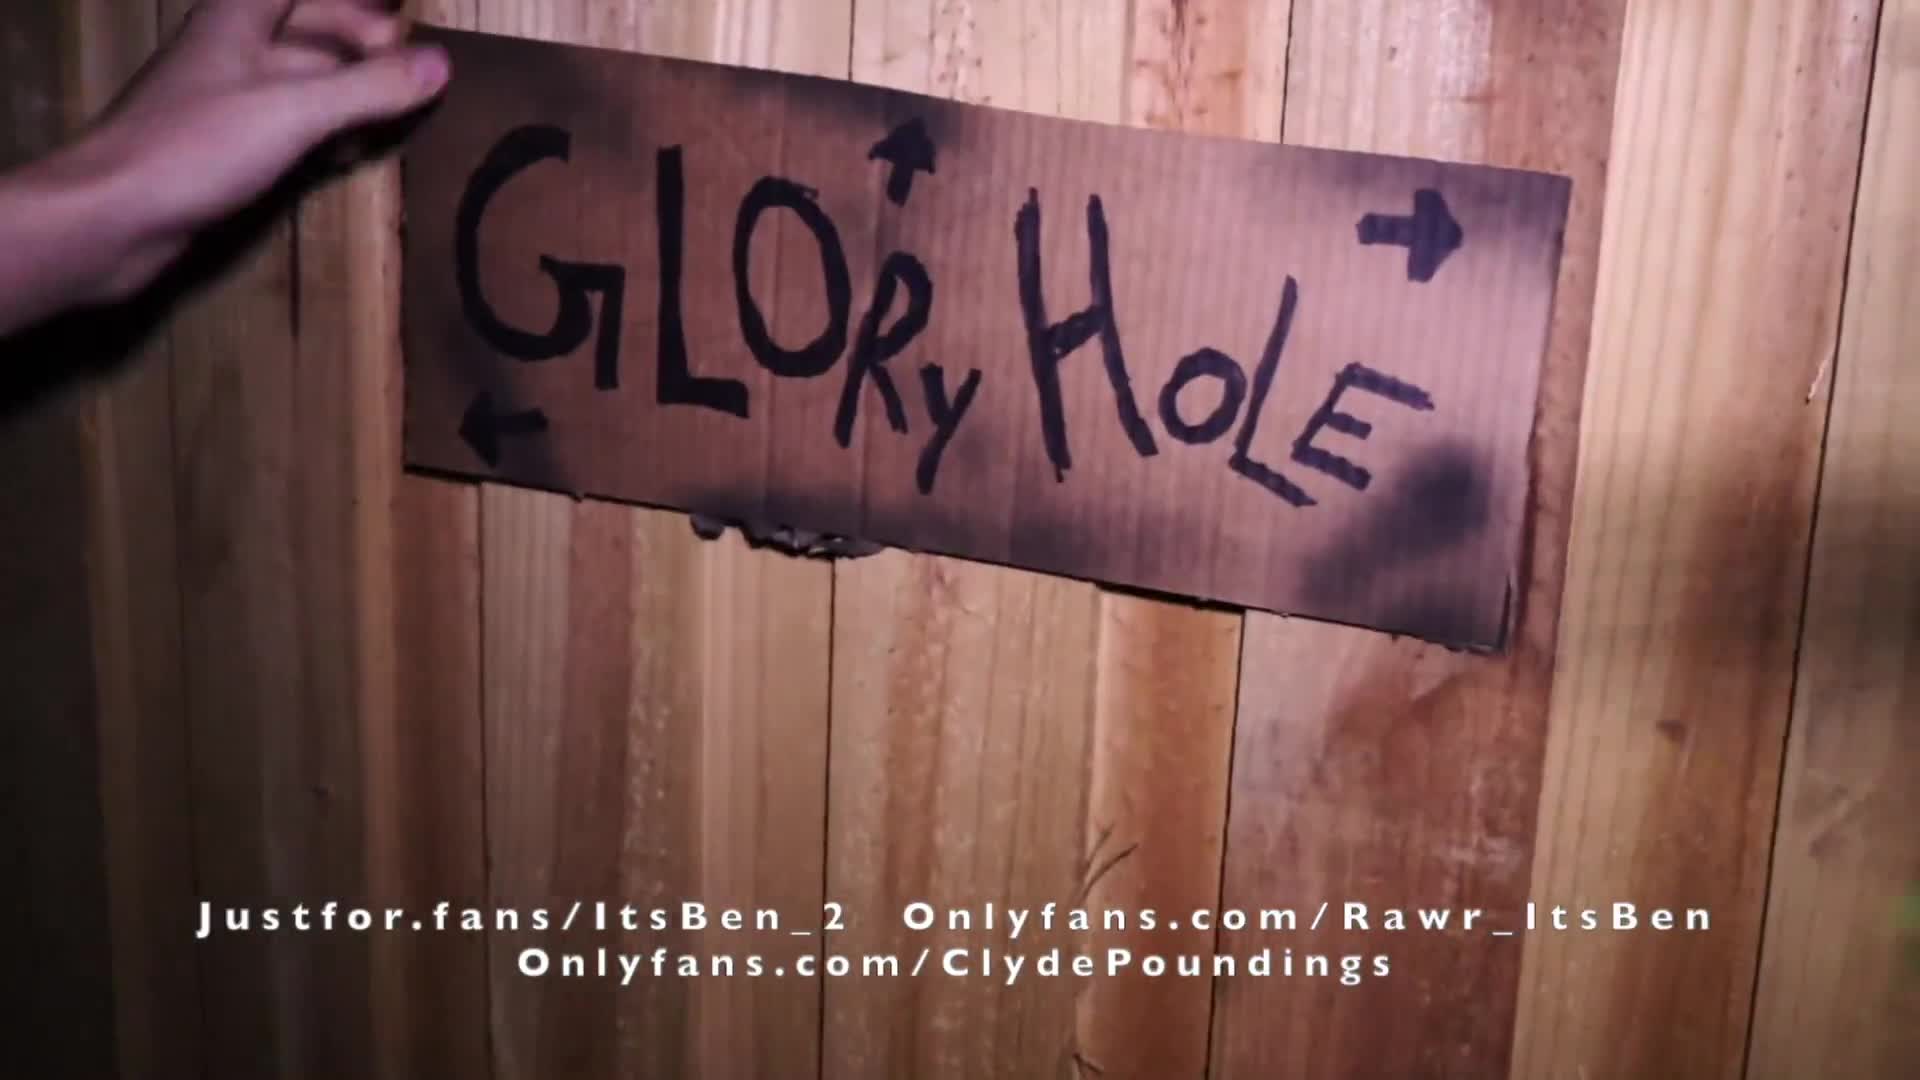 These two teen boys fuck a glory hole for the first time - Videos - xvix.eu